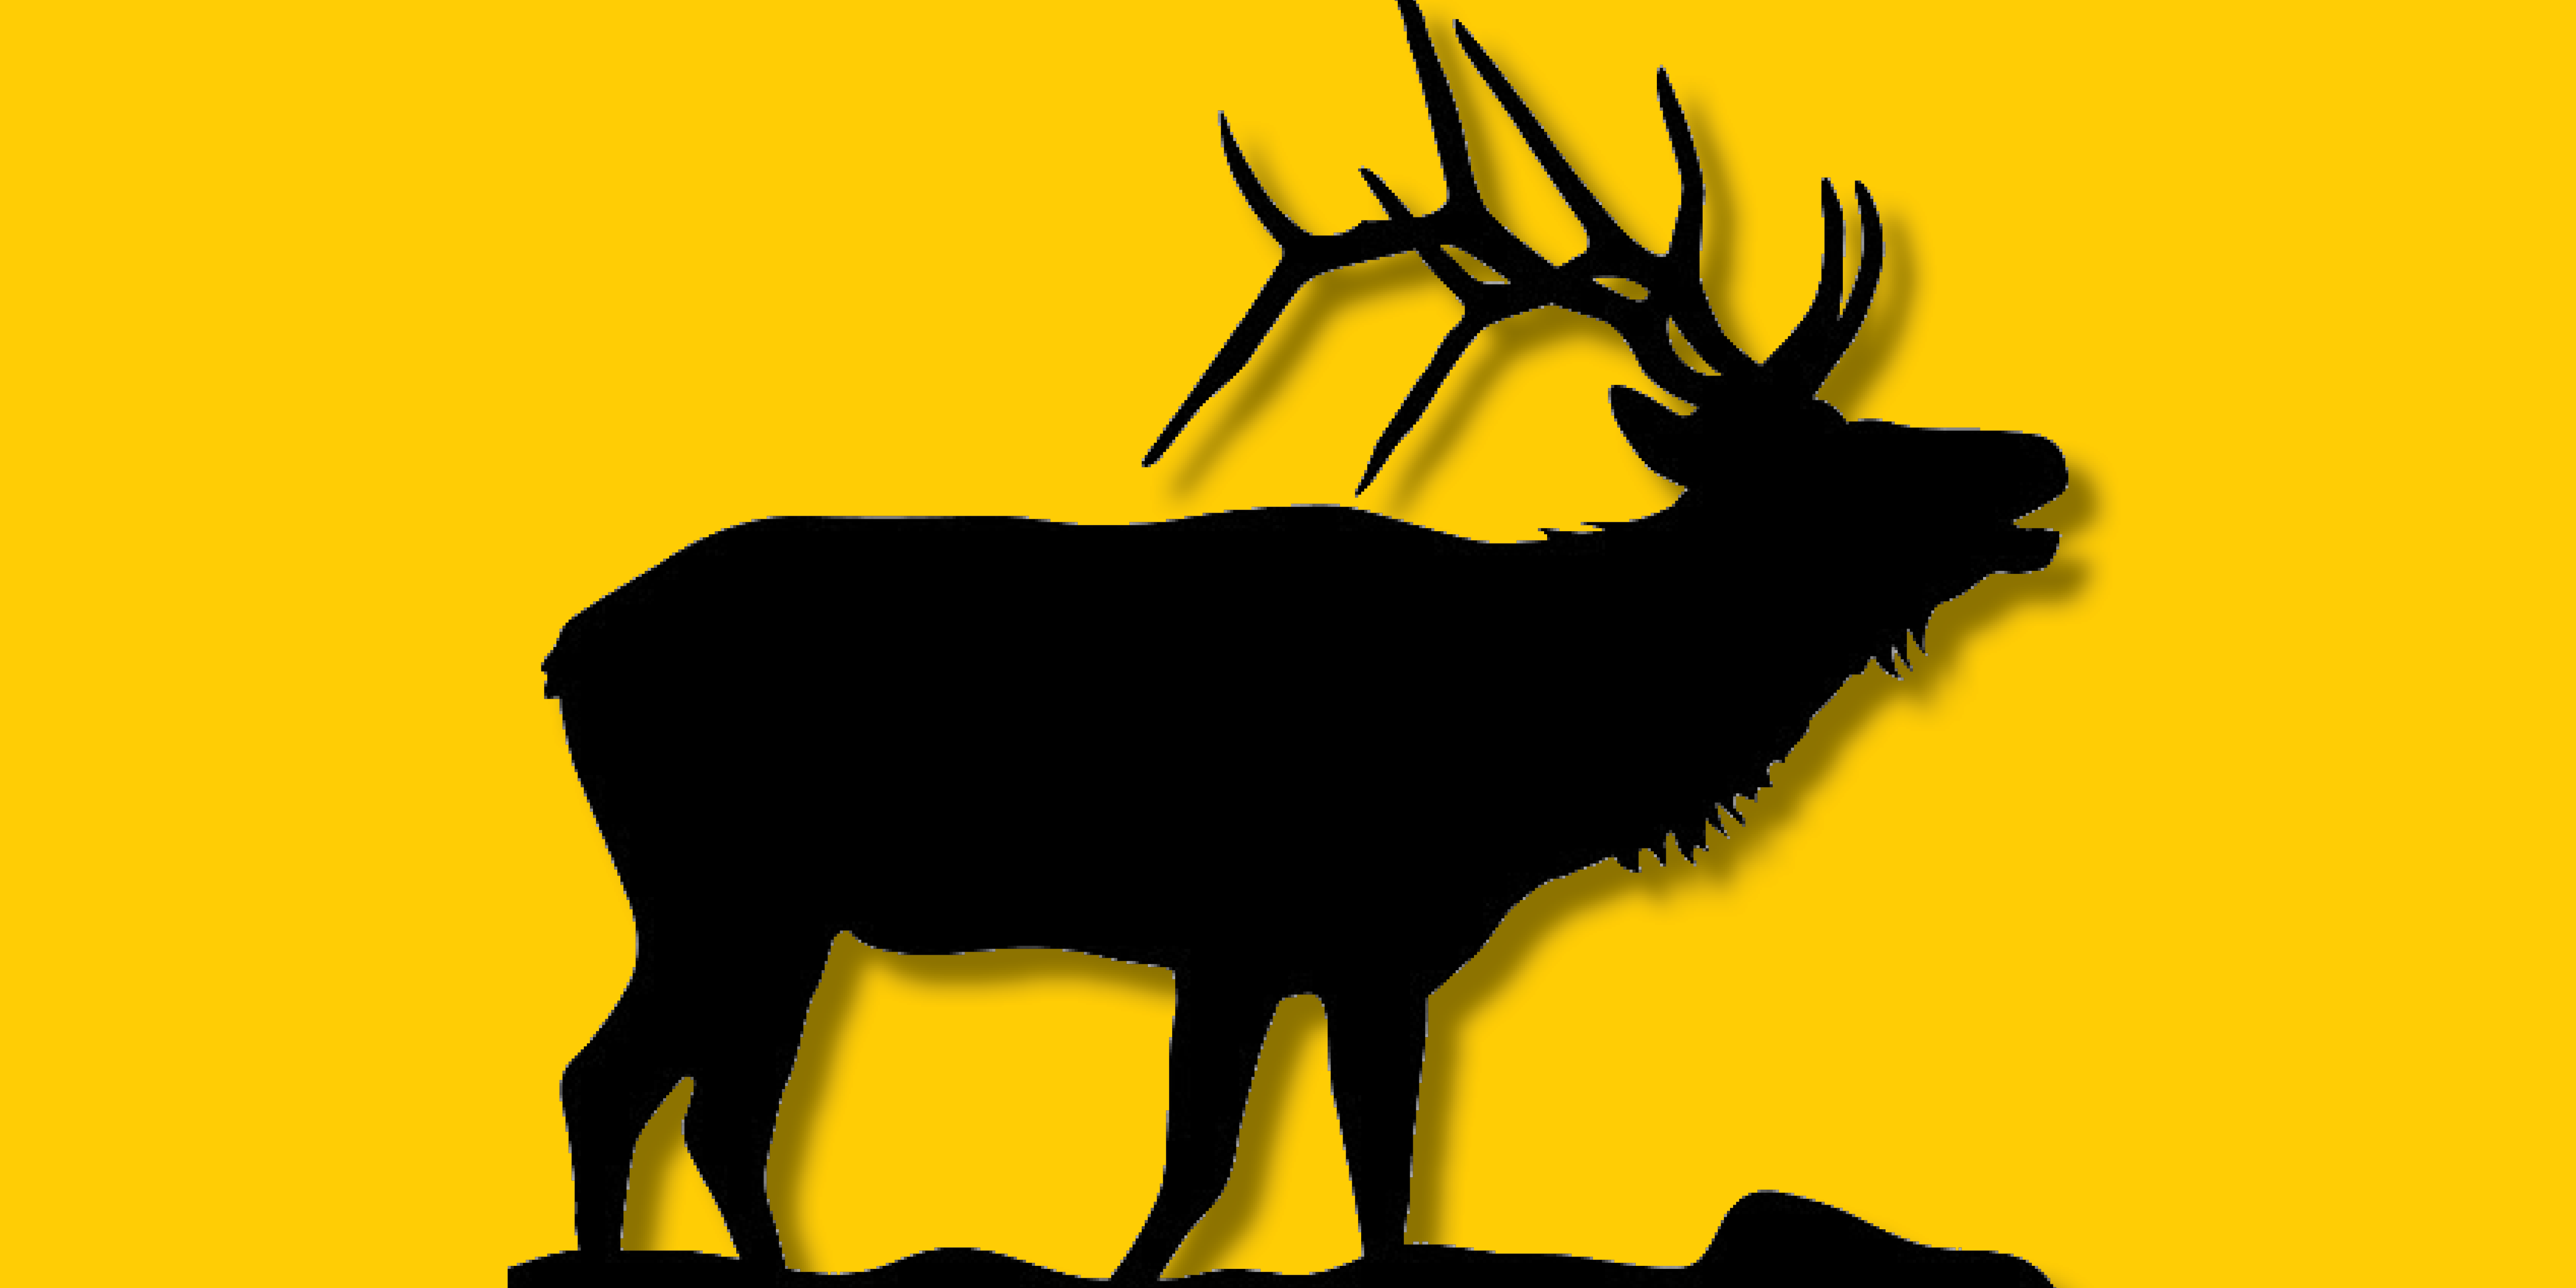 Print Your Own Protest Signs to Save California’s Tule Elk!